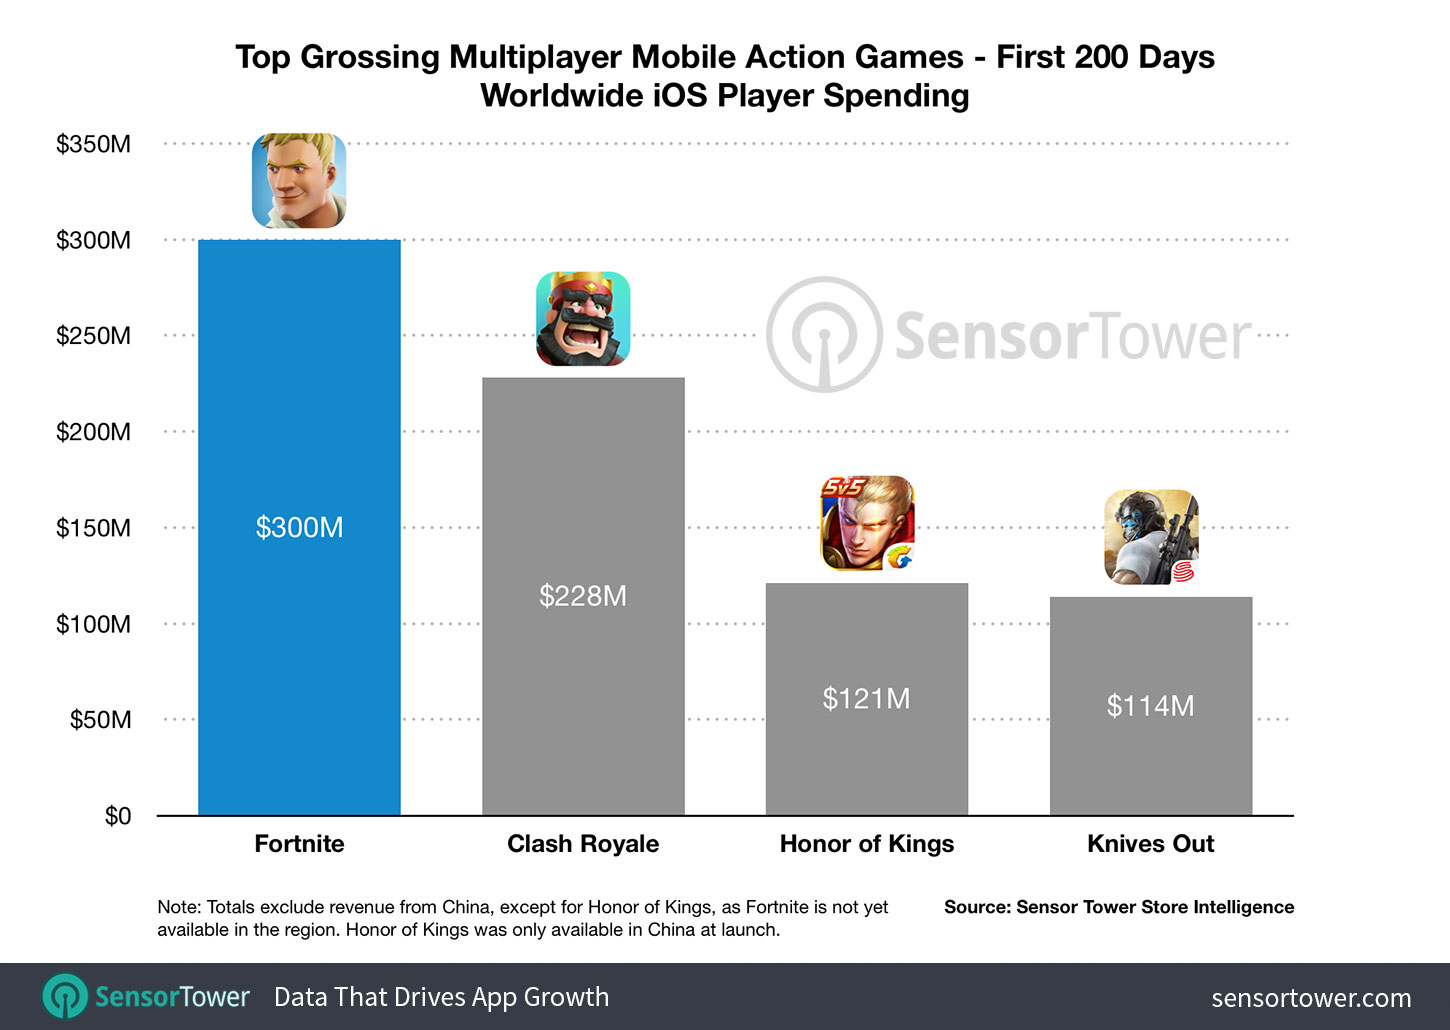 Chart showing Fortnite's gross revenue on iOS in its first 200 days compared to other top grossing mobile multiplayer games